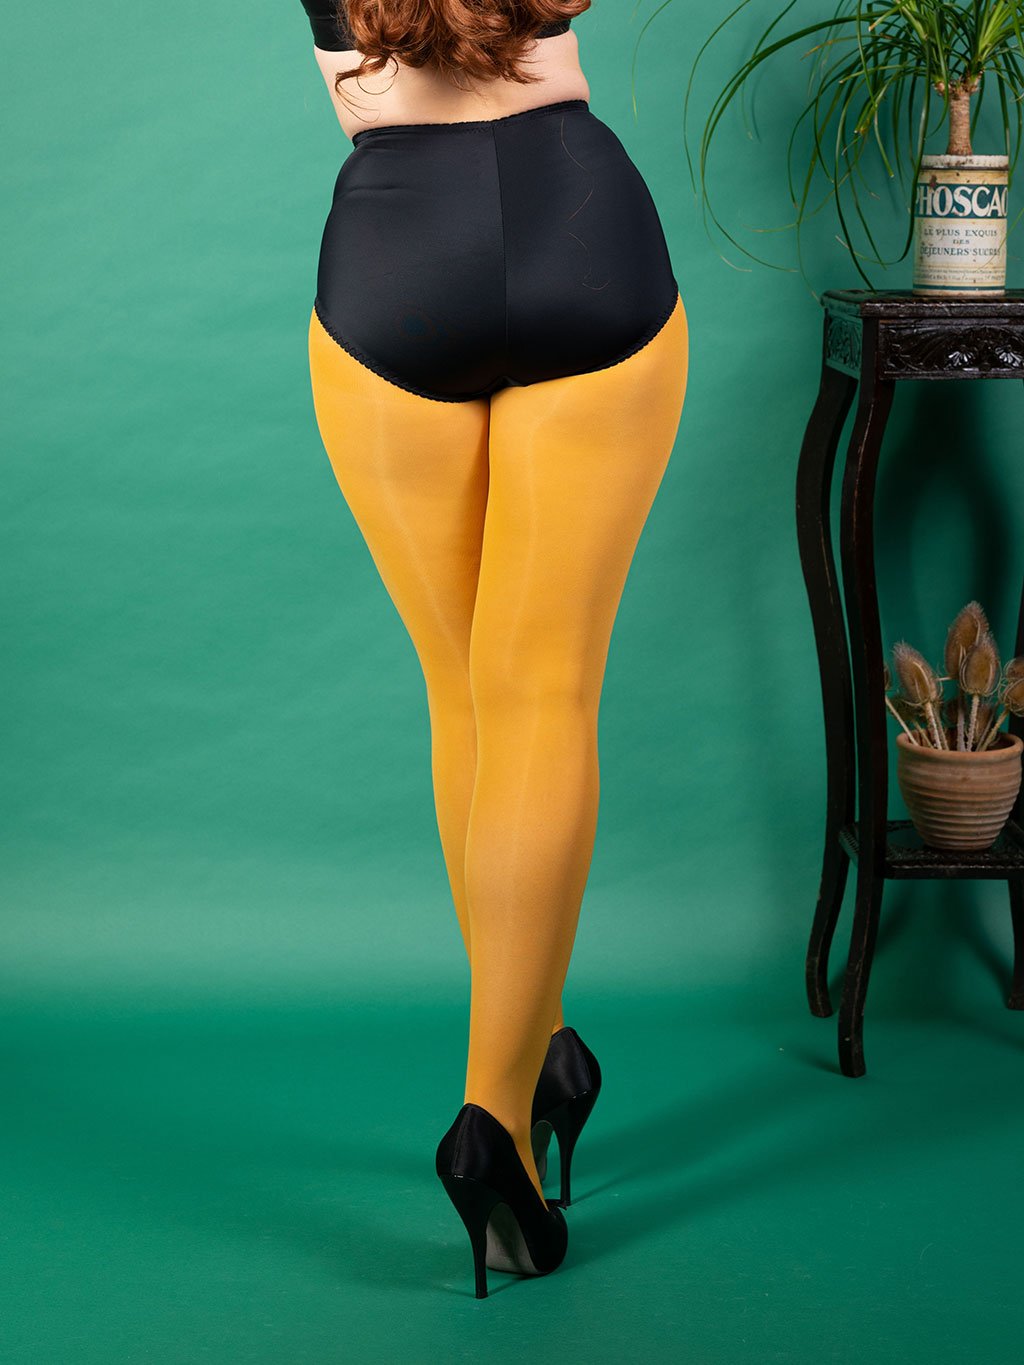 Mustard Yellow Opaque Tights by retro tights brand What Katie Did. 50 denier tights plus seamed stockings in a rainbow of colours.